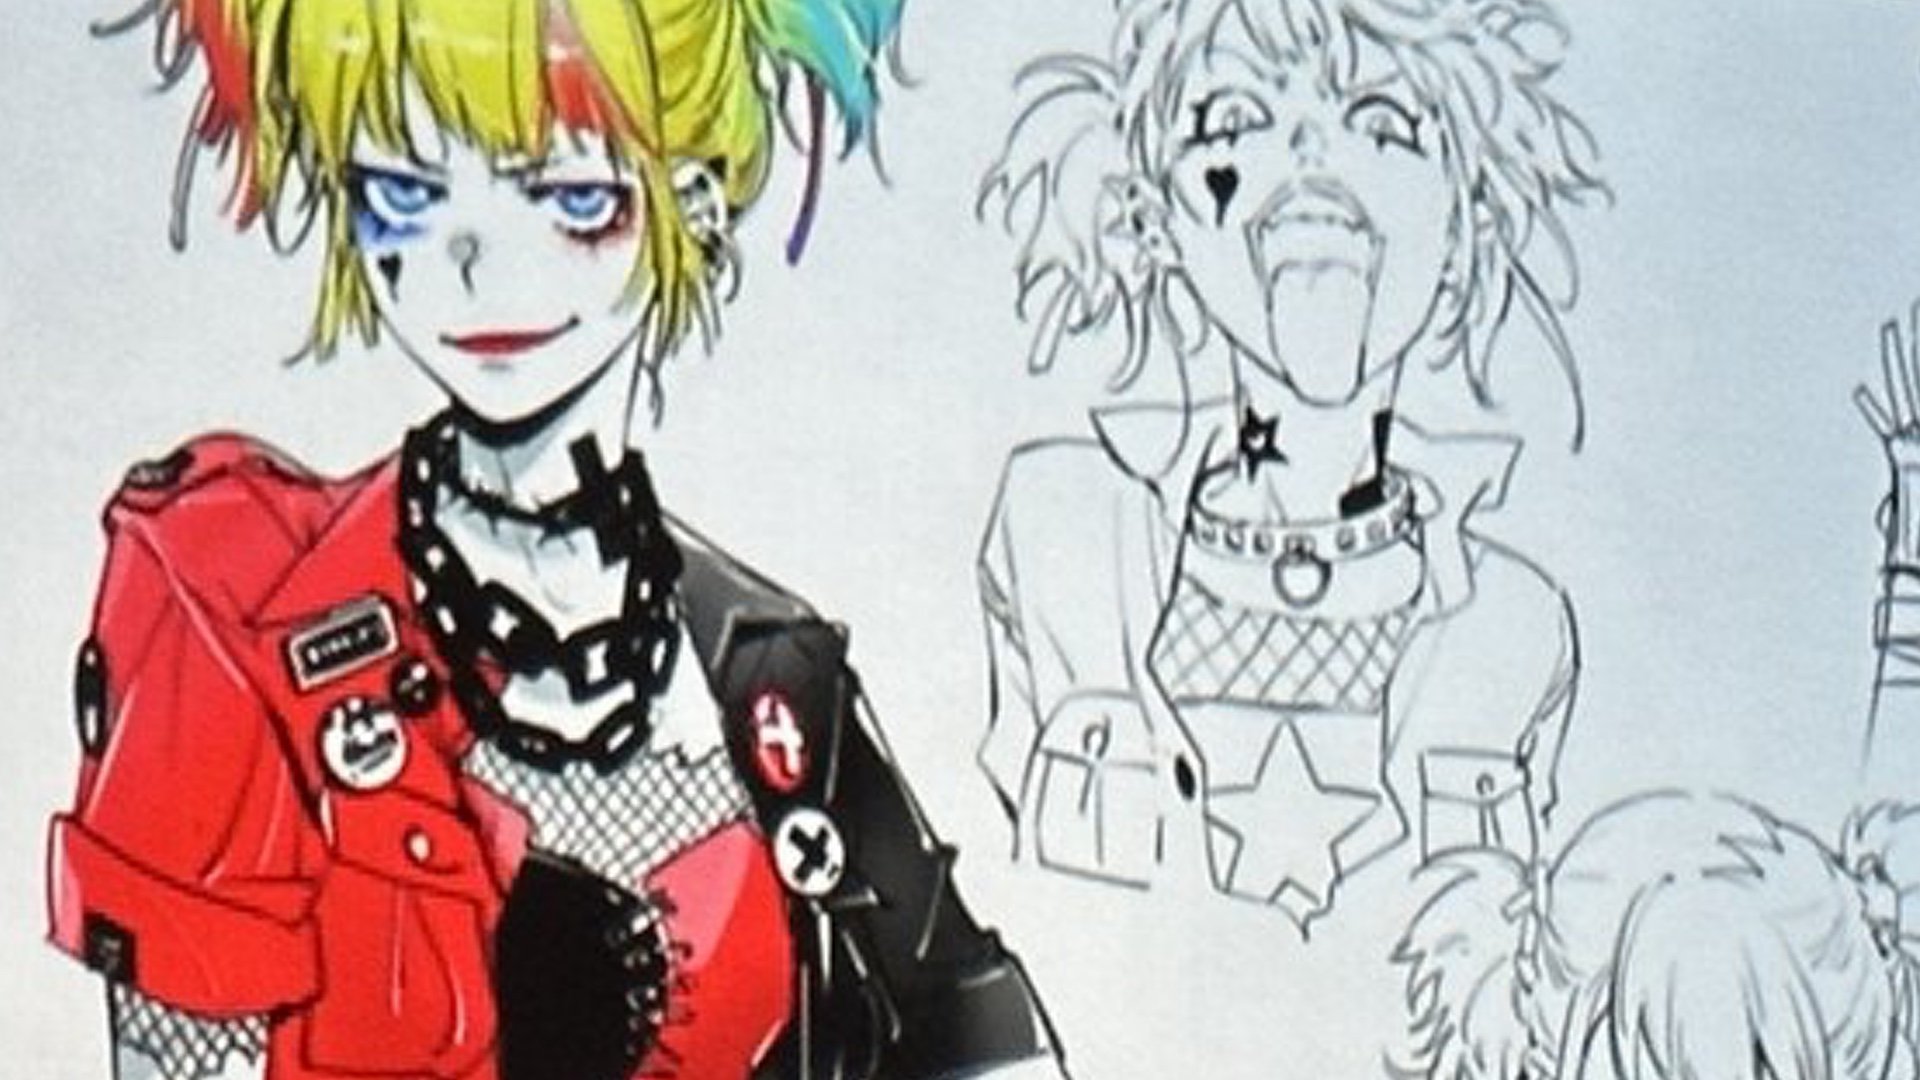 DC's SUICIDE SQUAD Is Getting a Fantasy Anime Series! — GeekTyrant